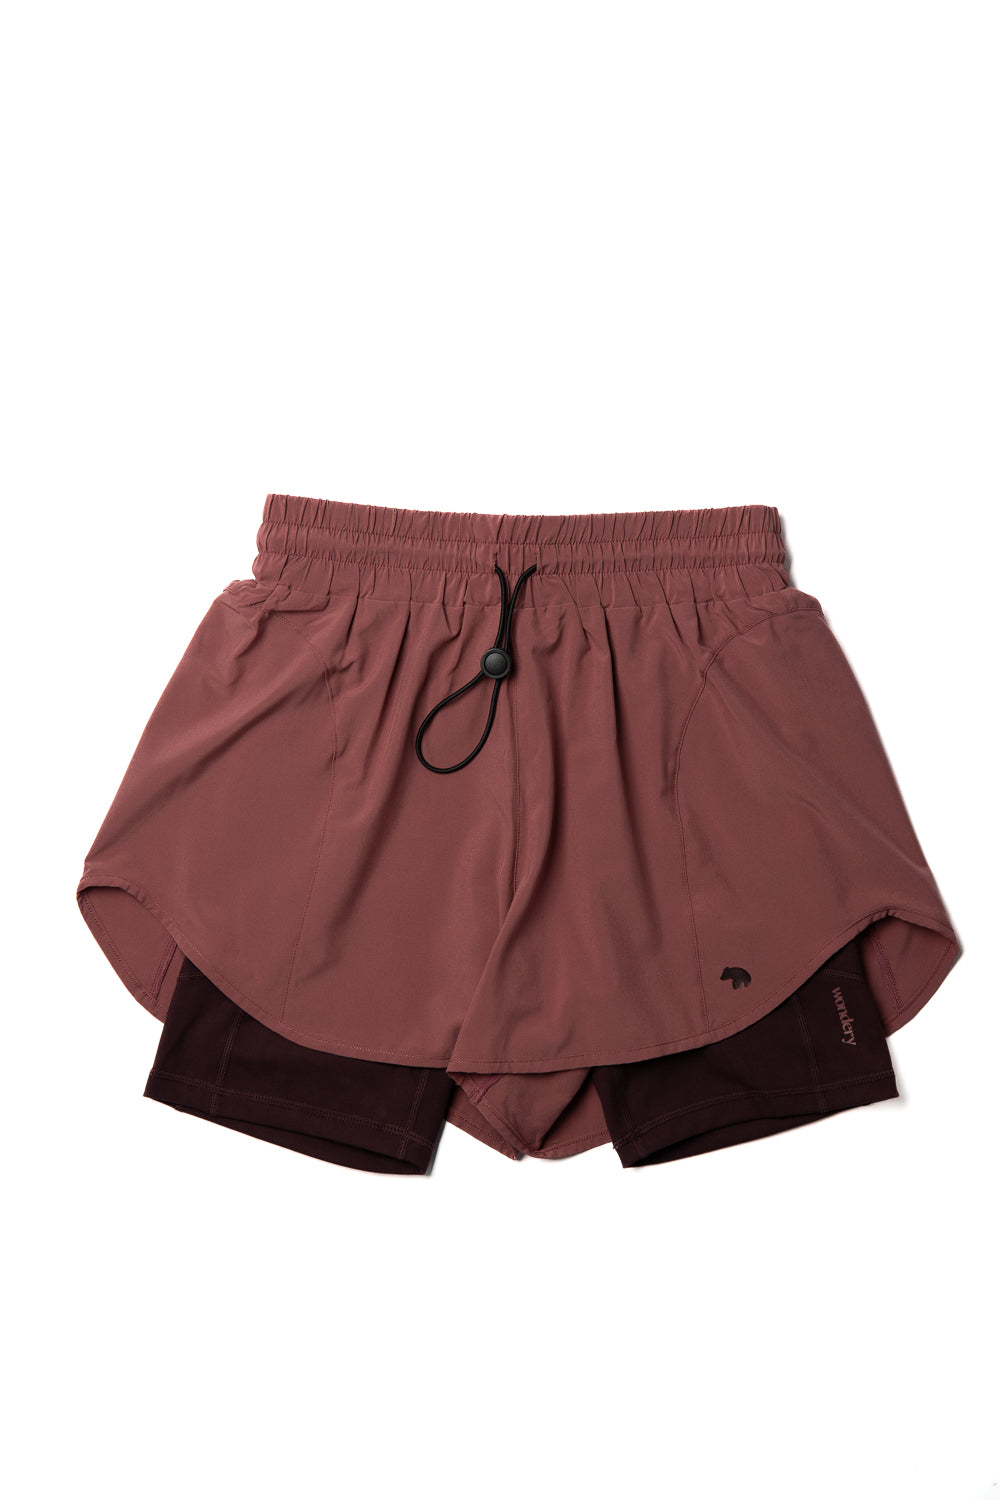 burgundy pink lightweight running shorts and biker shorts with side pocket and elastic waistband #color_dusty rose/mauve